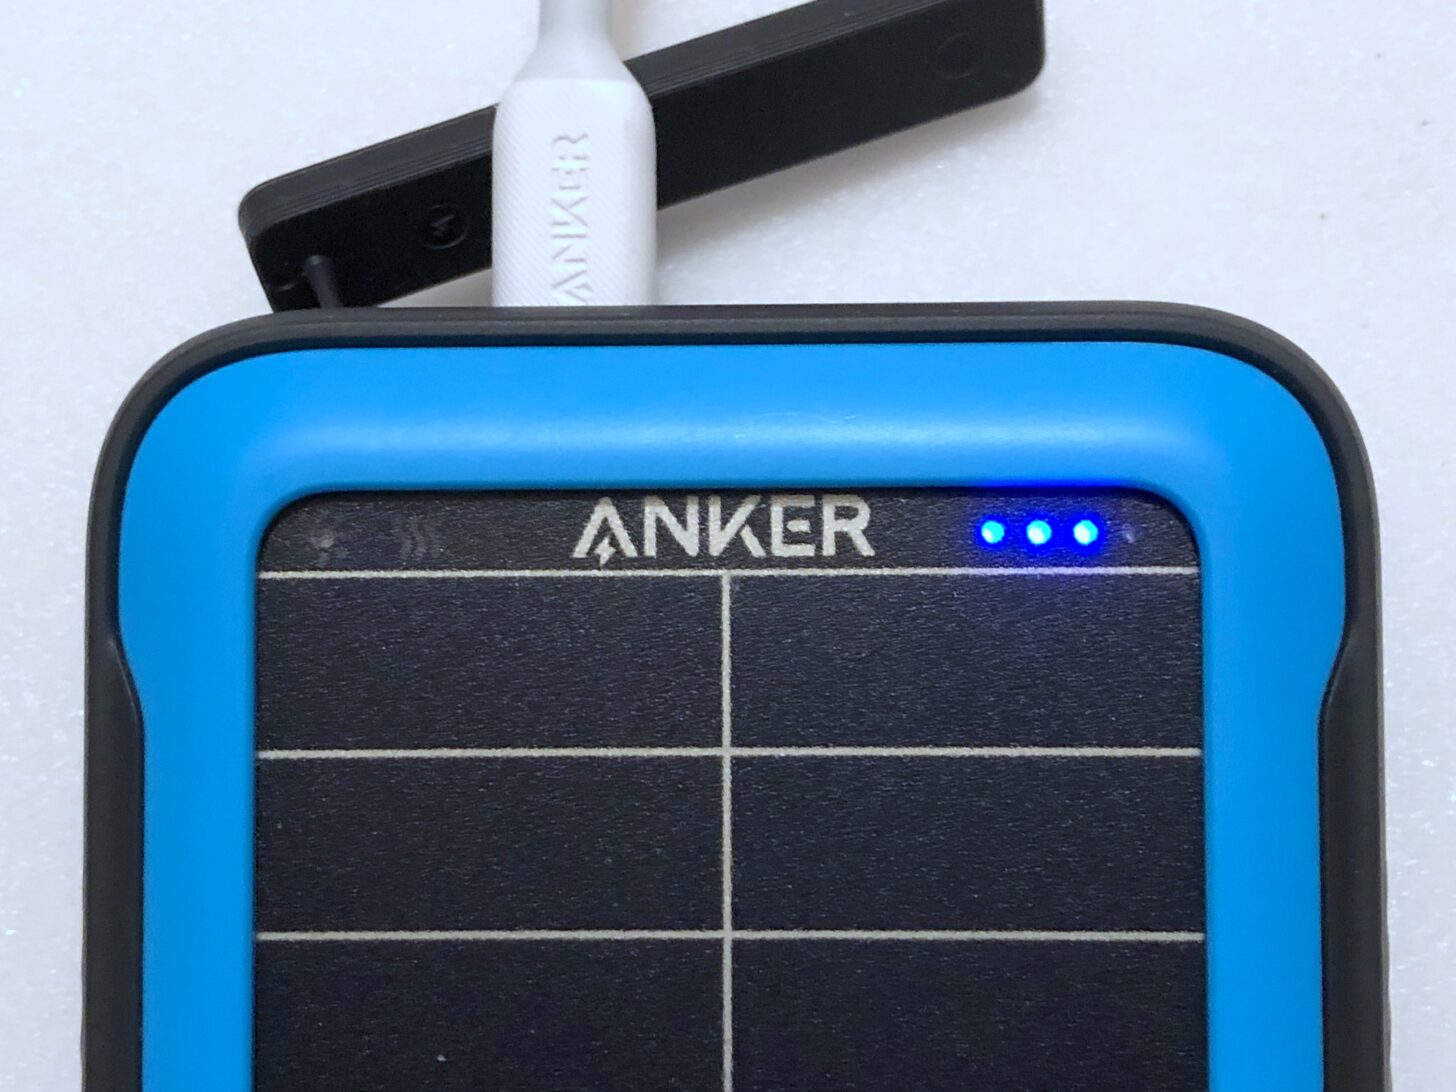 The Anker 20K Solar with three out of four indicator LEDs glowing and the port cover under a USB cable.